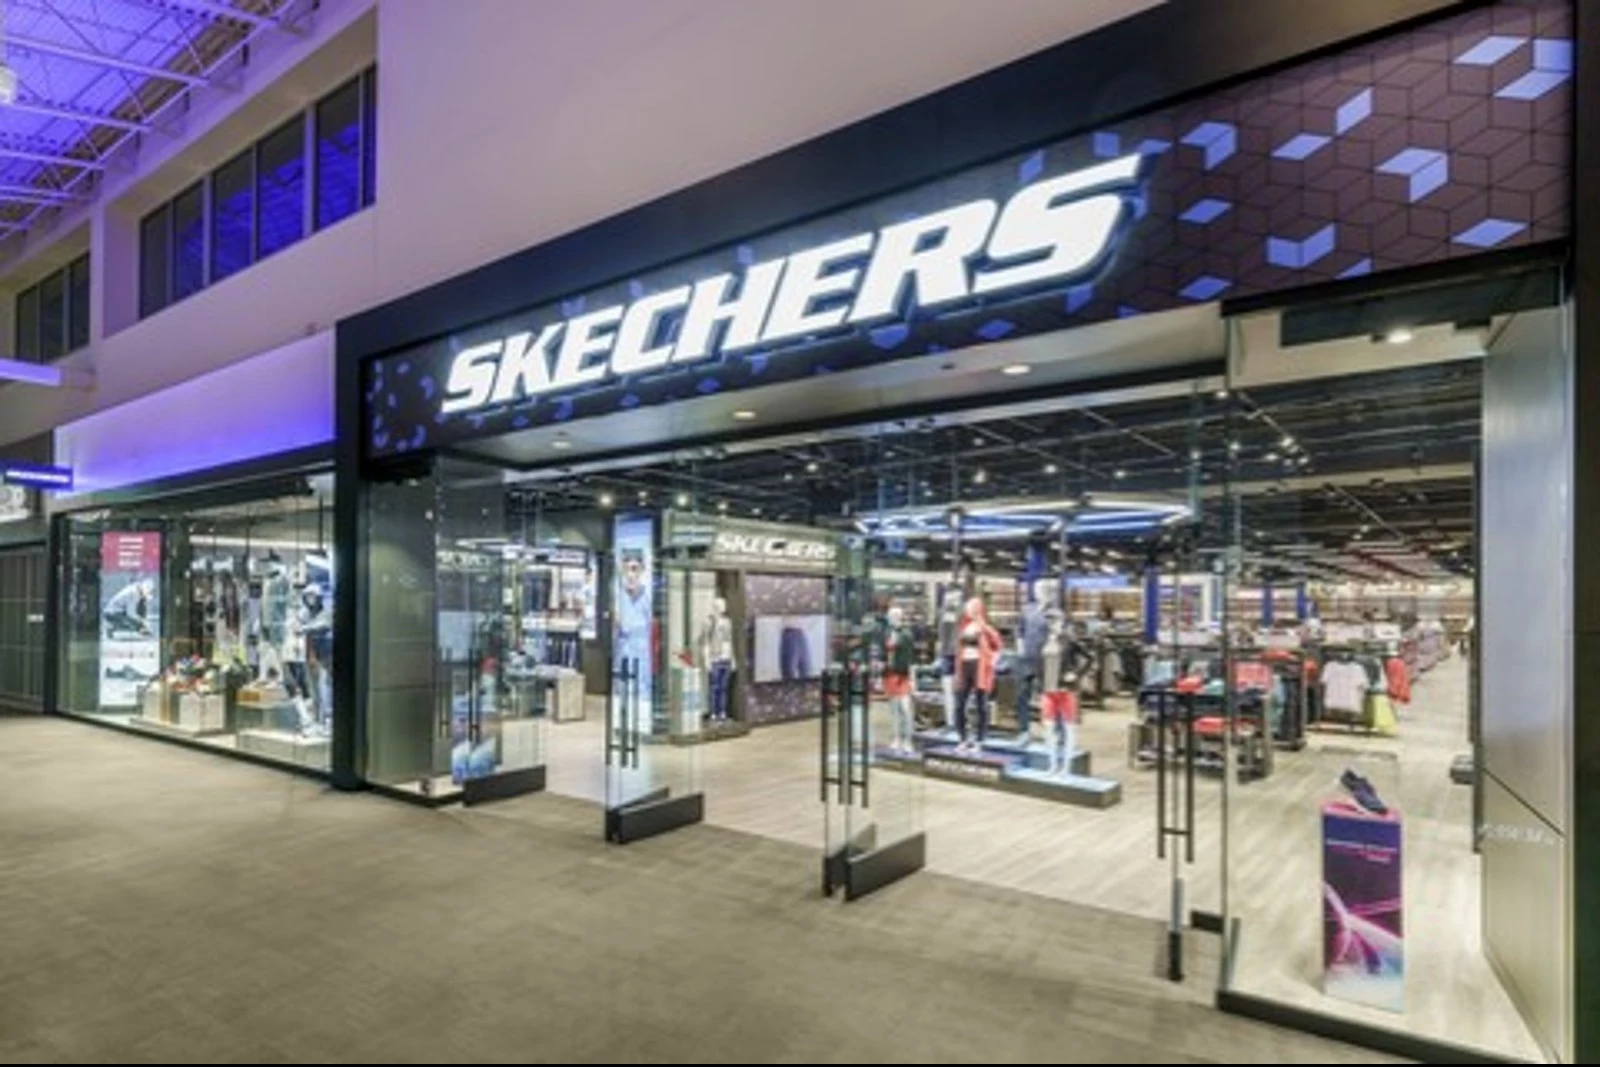 Skechers has opened a new store in New Jersey … and it's big